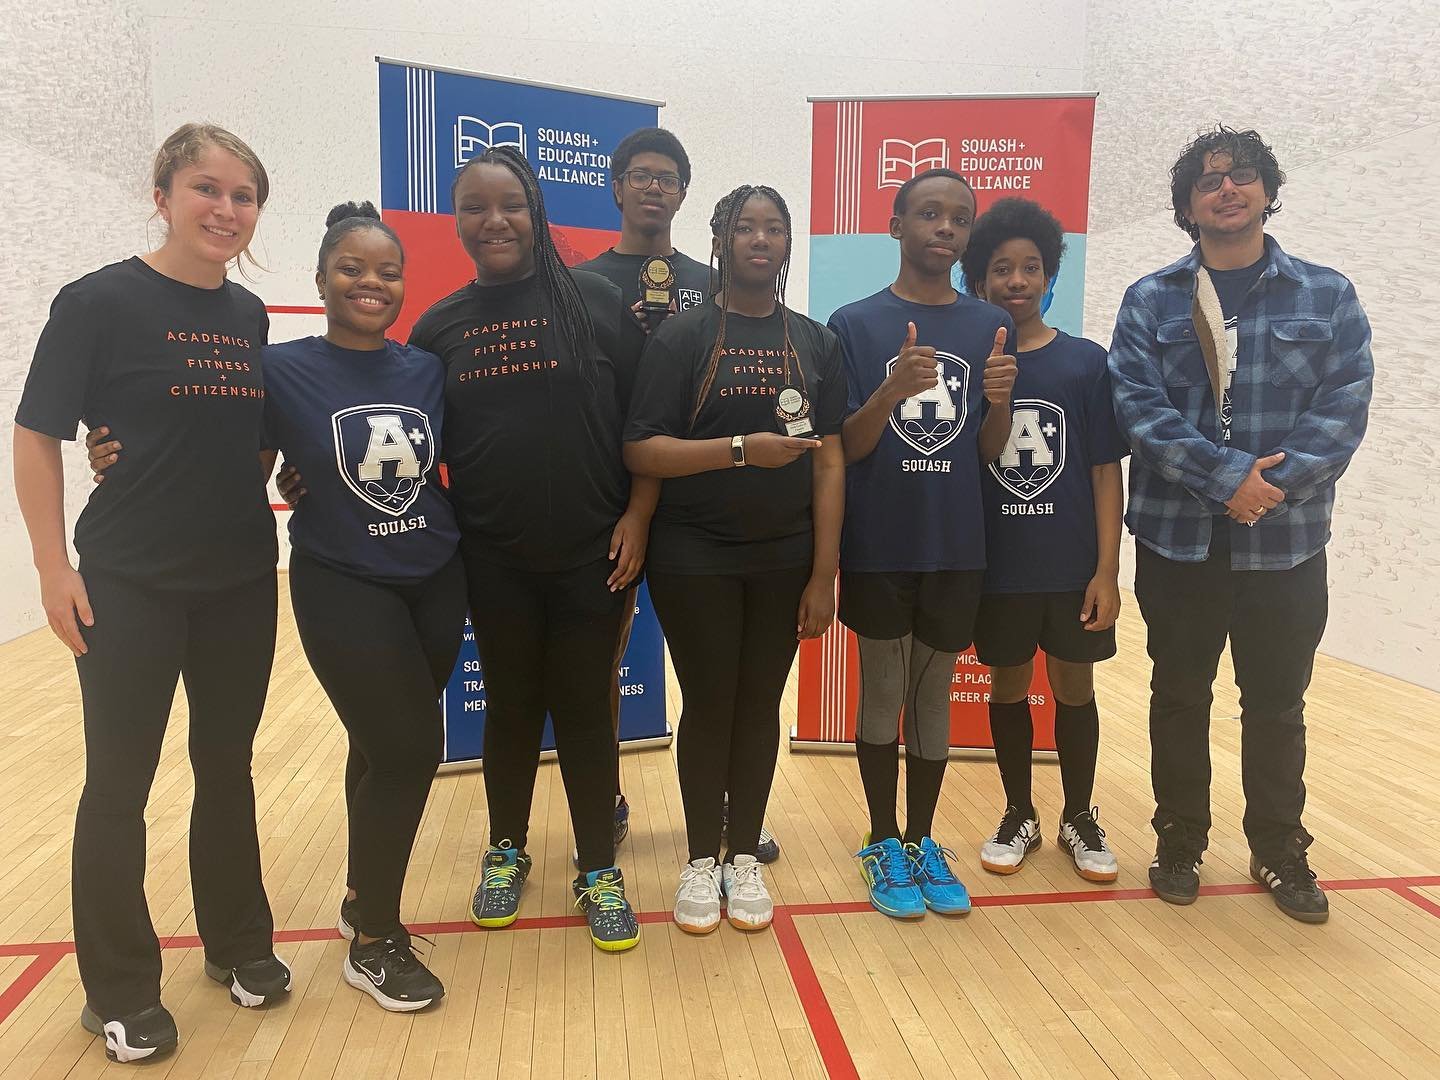 An unforgettable time at the 2024 Chicago Open, hosted by @squasheducation &amp; @metrosquashchicago 🌟 
Our students shined with top finishes and learned key lessons in sportsmanship, refereeing and tournament etiquette. Huge thank you to the A+ par